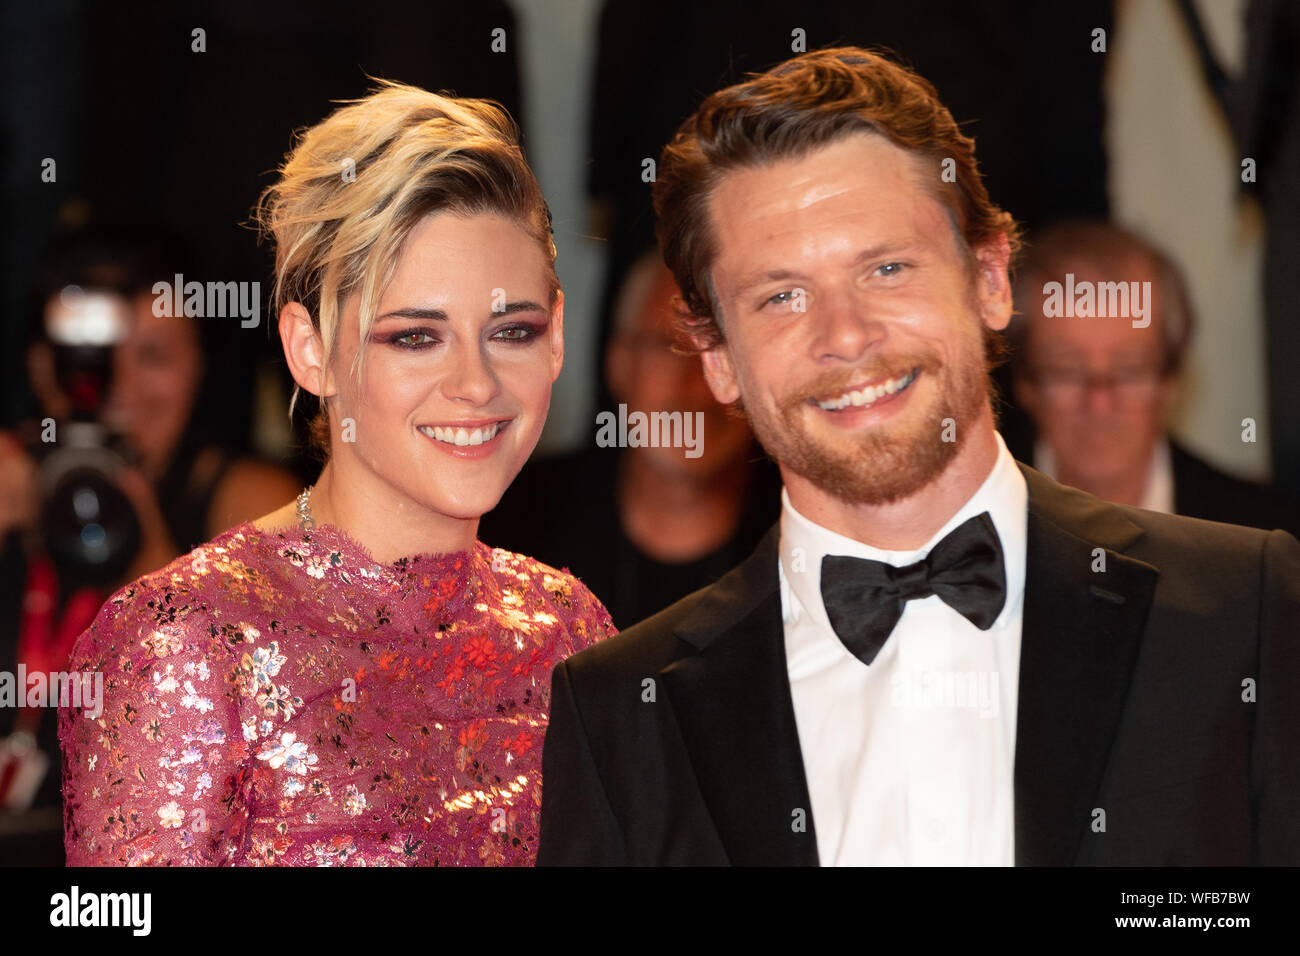 VENICE, Italy. 30th Aug, 2019. Kristen Stewart and Jack O'Connell pose for photographers at the red carpet for the World Premiere of 'Seberg' during the 76th Venice Film Festival at Palazzo del Cinema on August 30, 2019 in Venice, Italy. Credit: Roberto Ricciuti/Awakening/Alamy Live News Stock Photo